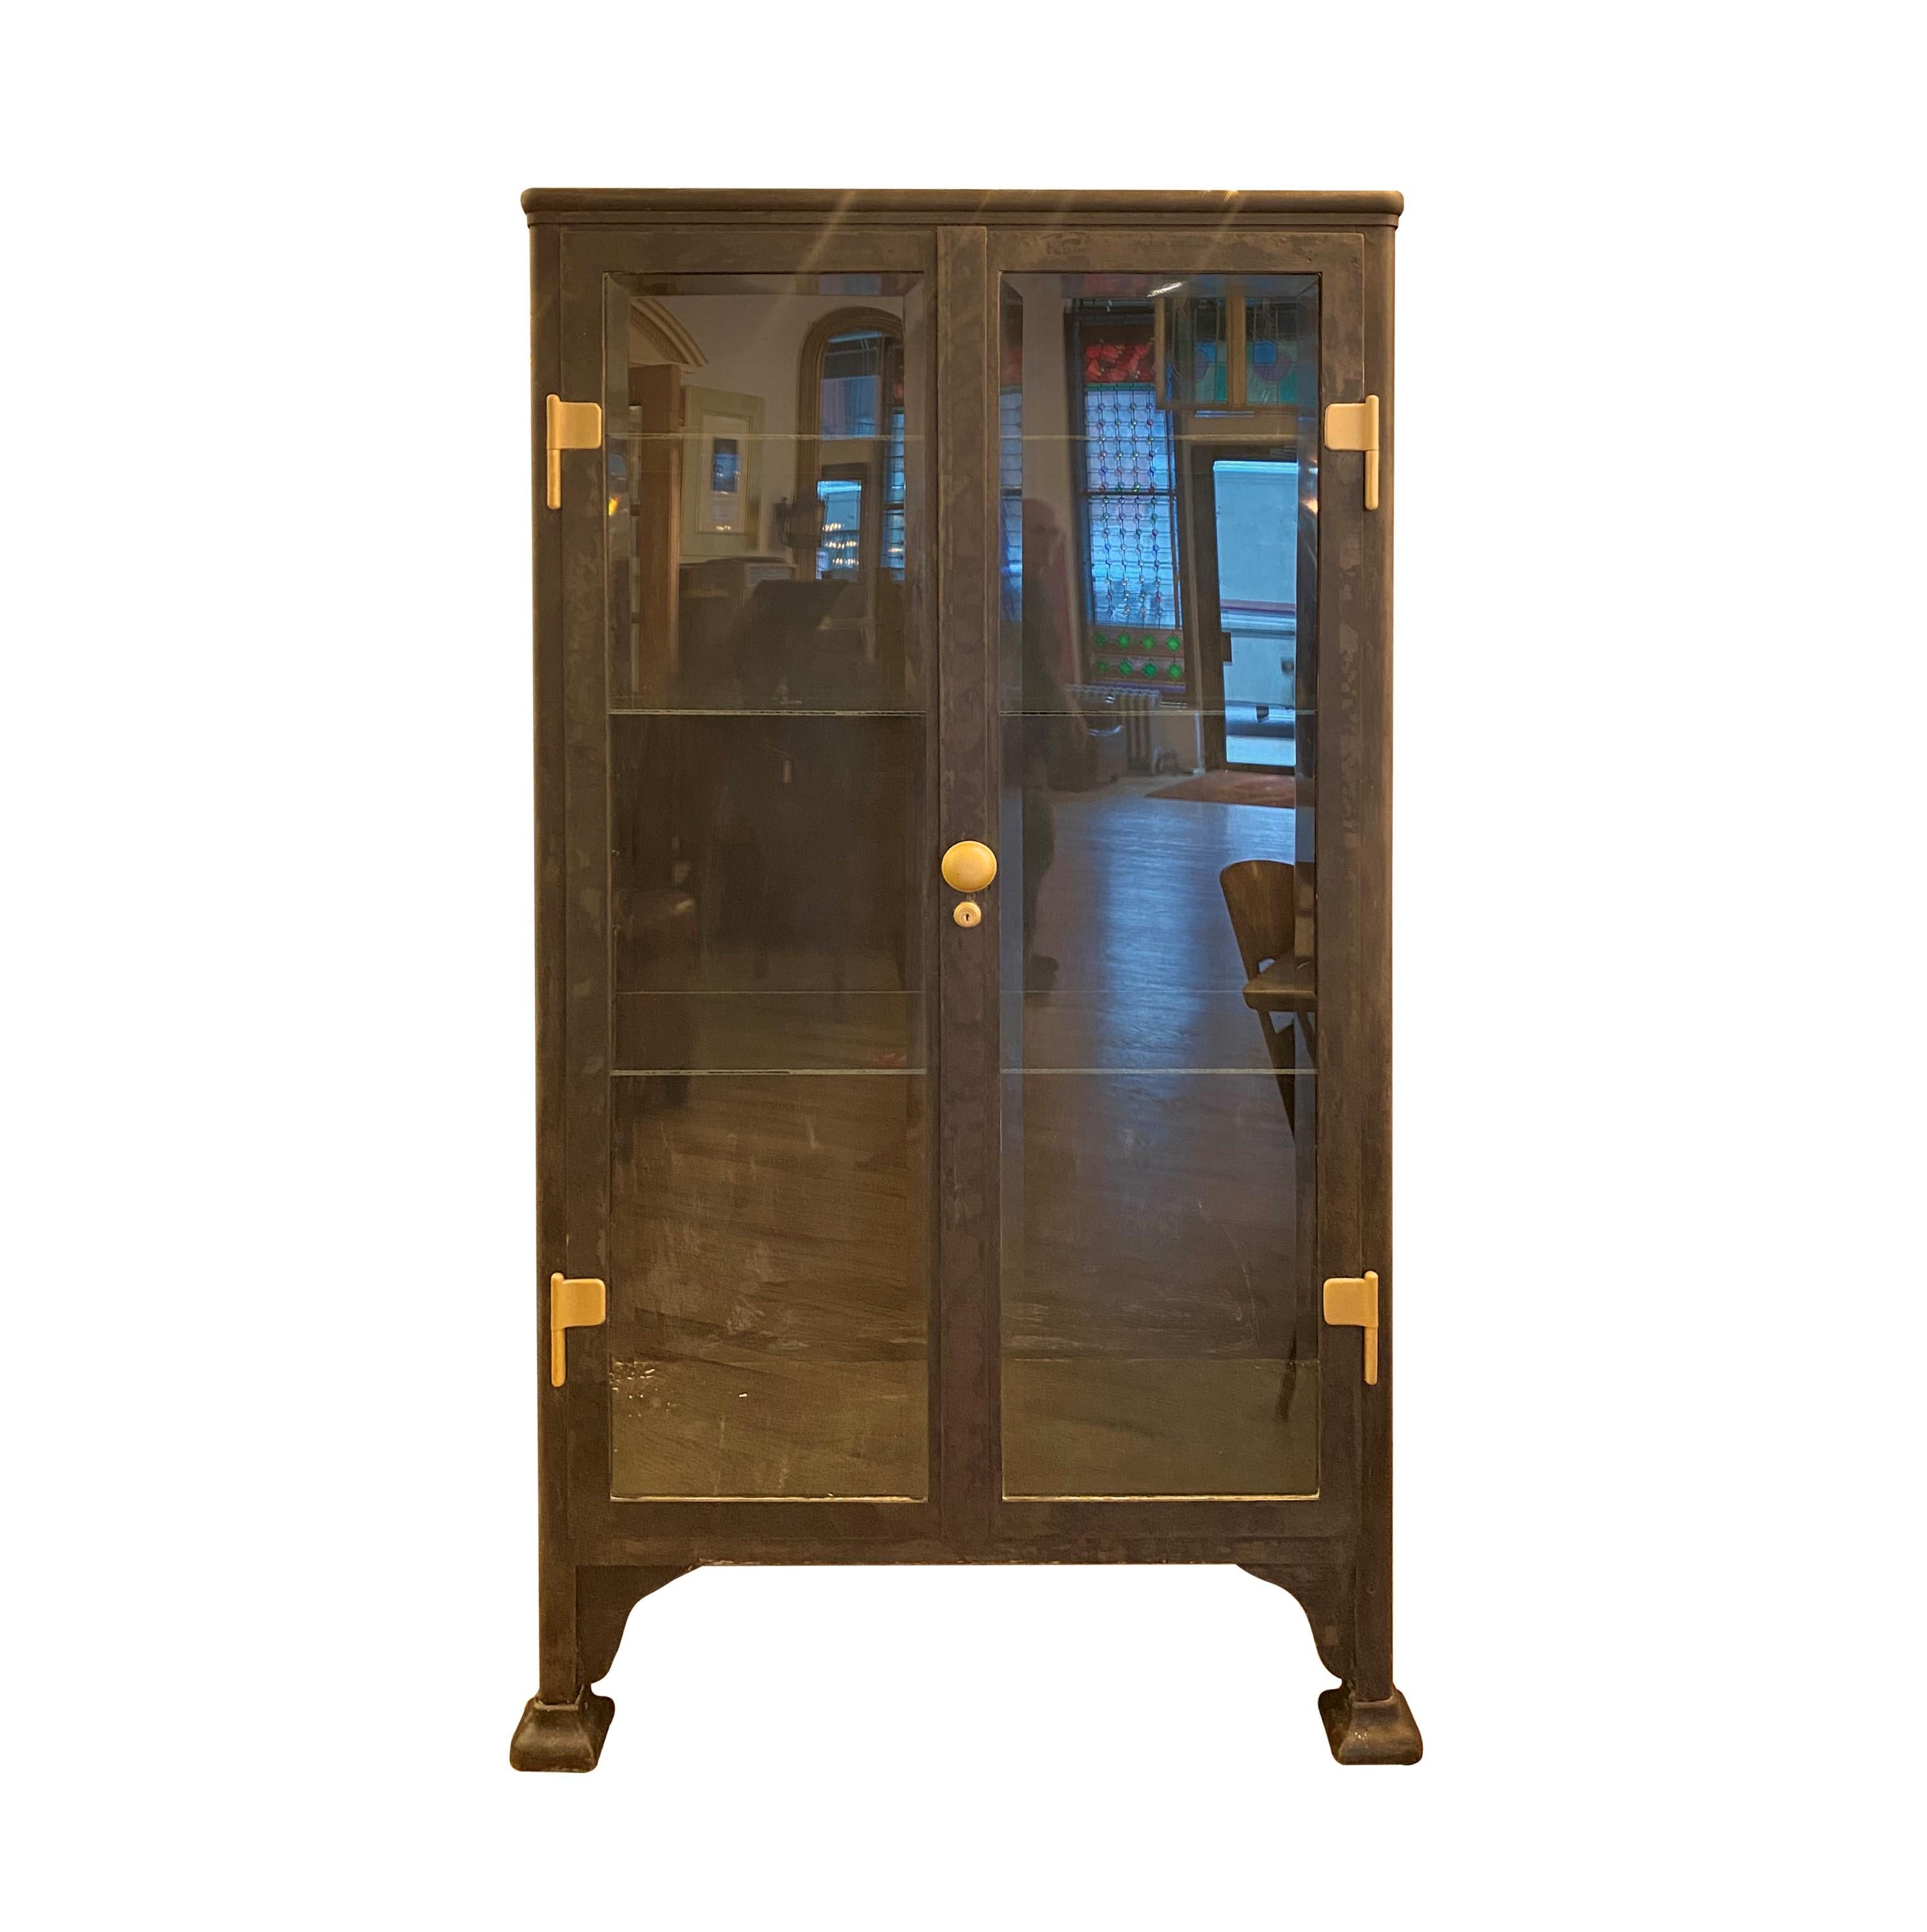 Antique 1020s cast iron double door medicine cabinet with casters. Features four glass shelves and beveled glass doors and side panels. Comes with the brushed brass door hardware. Please note, this item is located in one of our NYC locations.